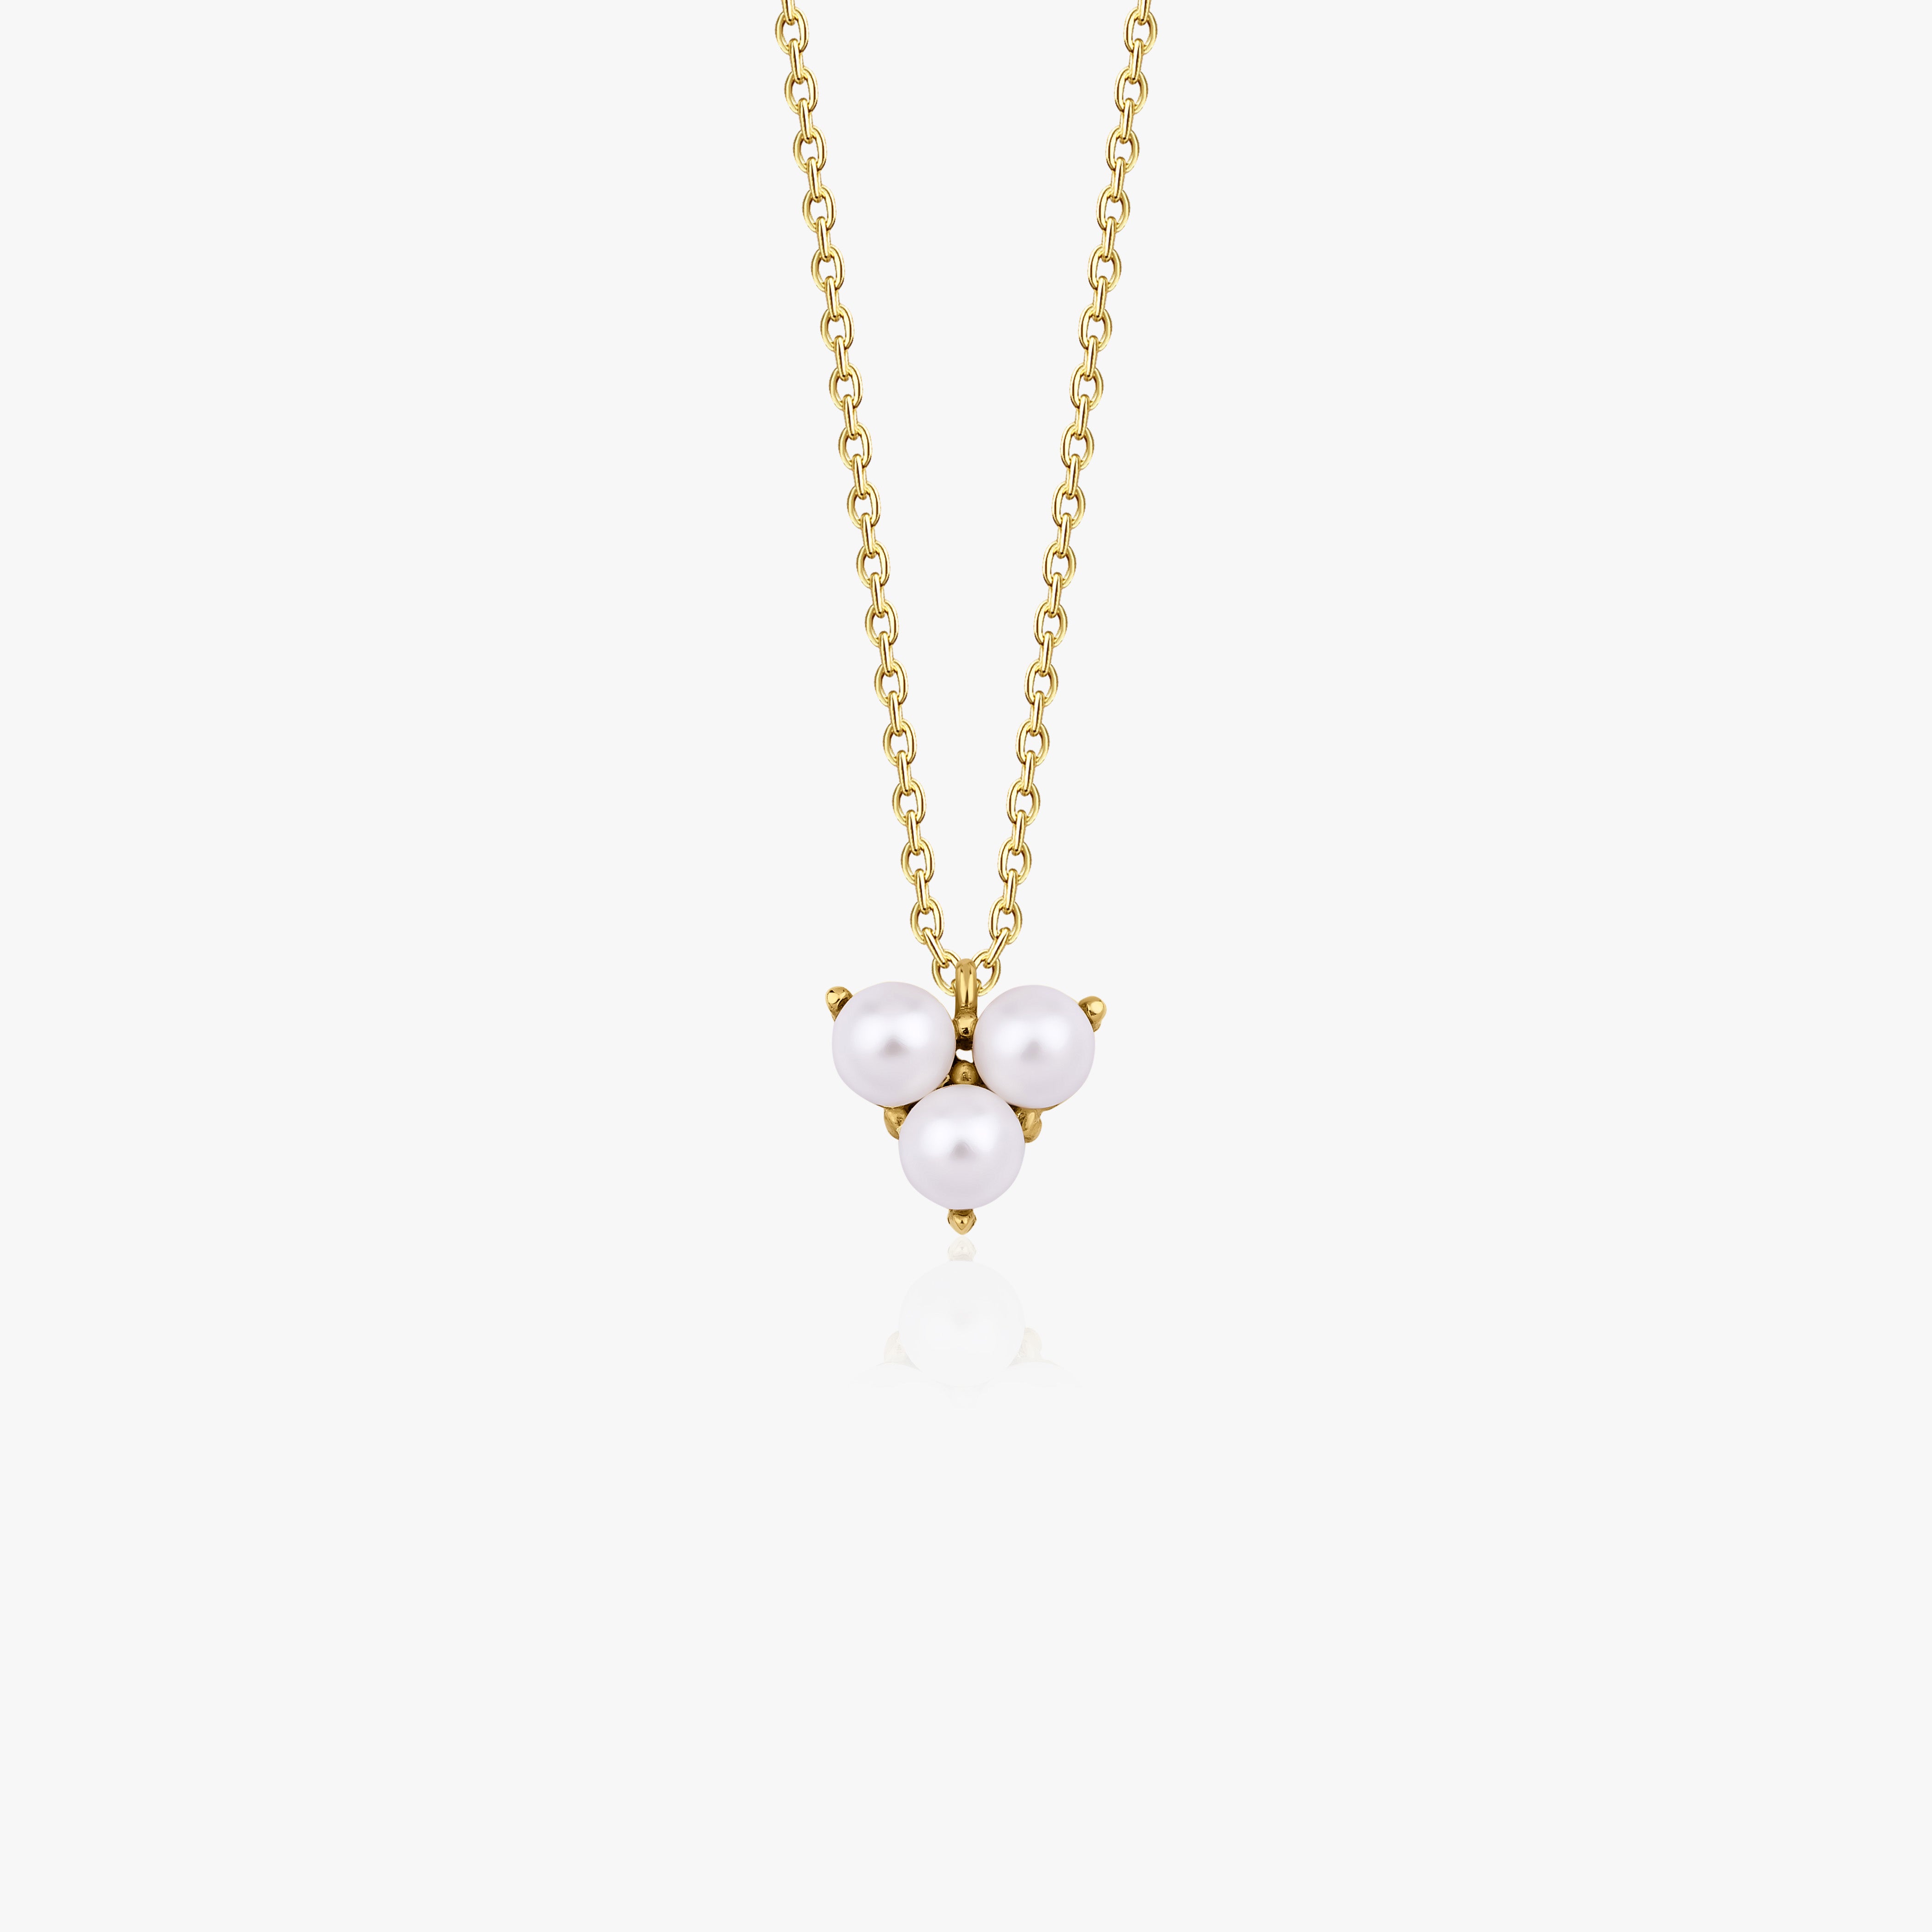 Triple Pearl Necklace in 14K Gold